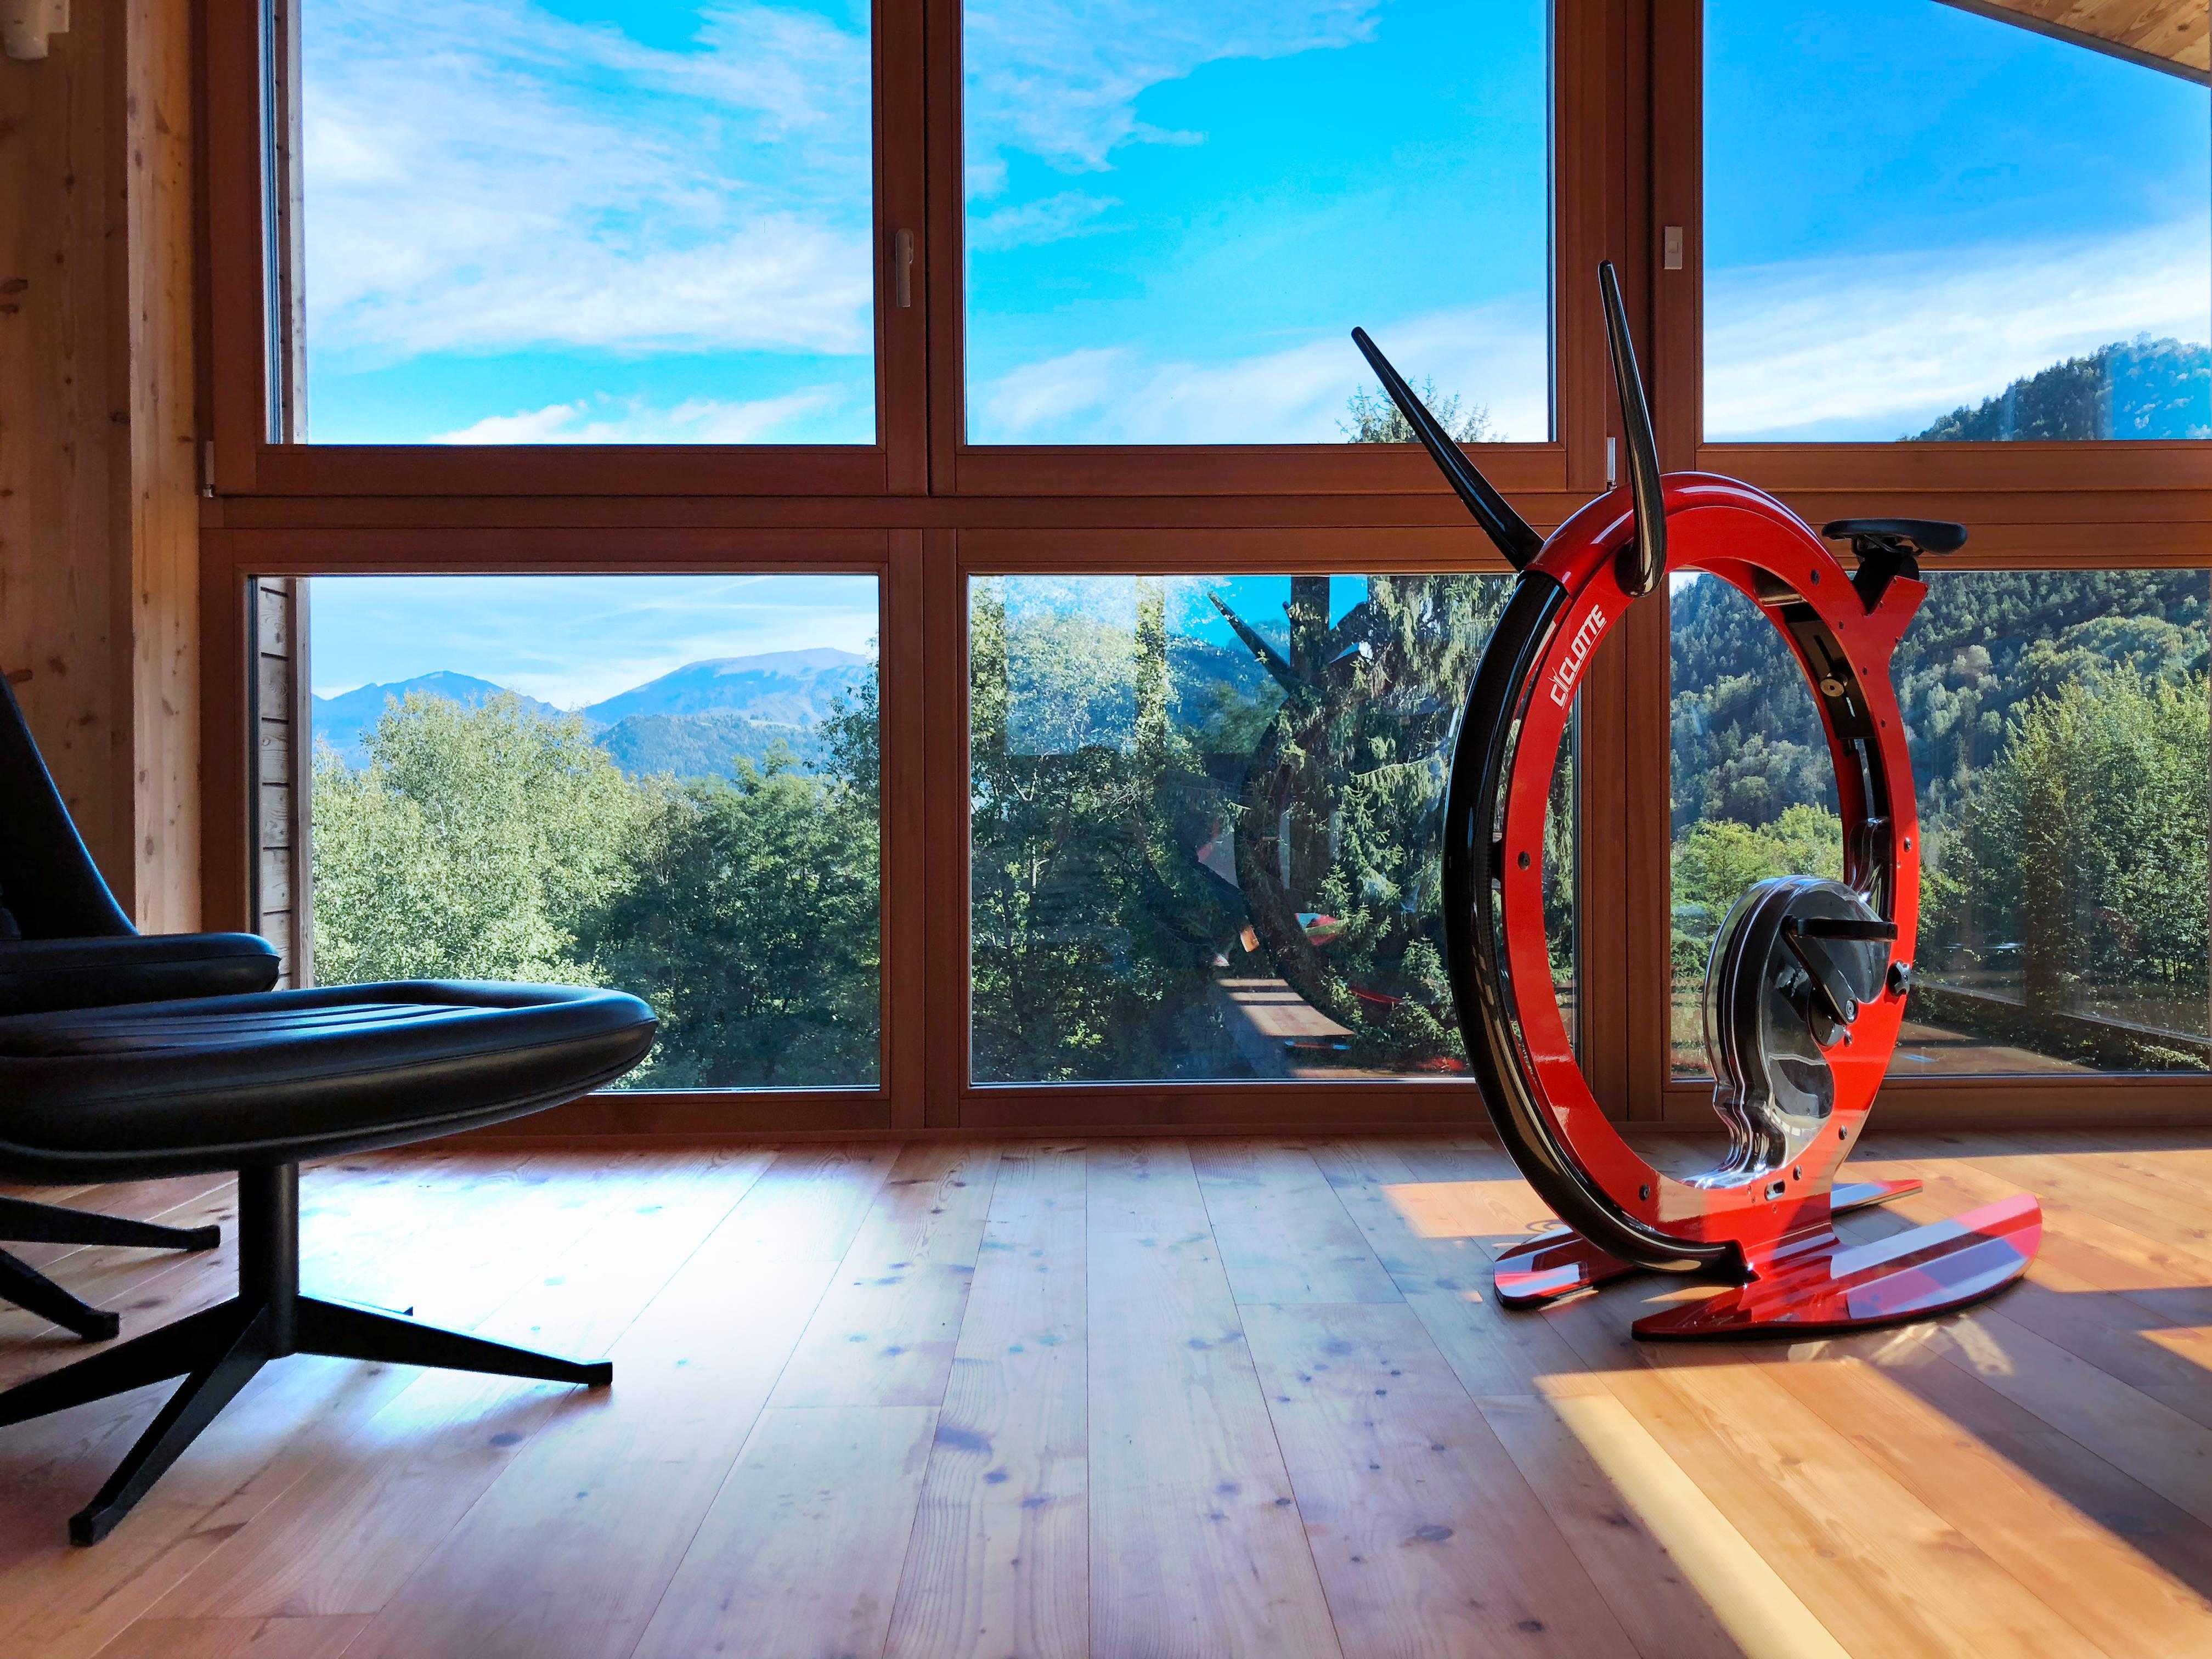 Ciclotte Bike is an innovative exercise bike, designed and made in Italy, that combines idea, form and technology rethinking the traditional aesthetic and functional values of an exercise bike. Ciclotte Bike has been manufactured using exceptional